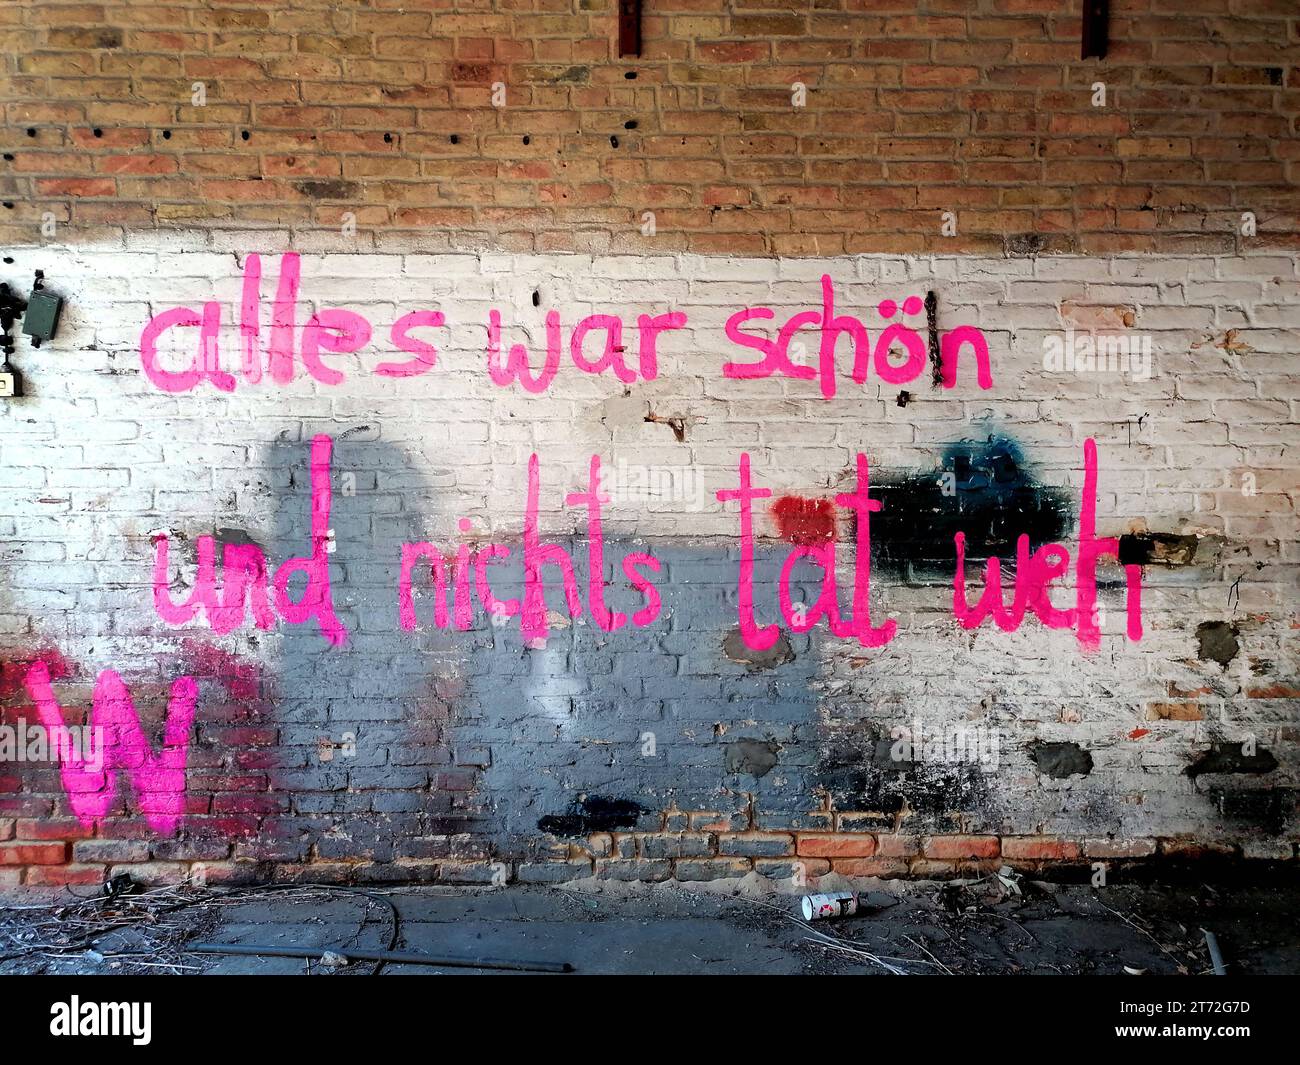 Graffiti auf einem Lost Place sagt: alles war schön und nichts tat weh. *** Graffiti on a lost place says everything was beautiful and nothing hurt Credit: Imago/Alamy Live News Stock Photo